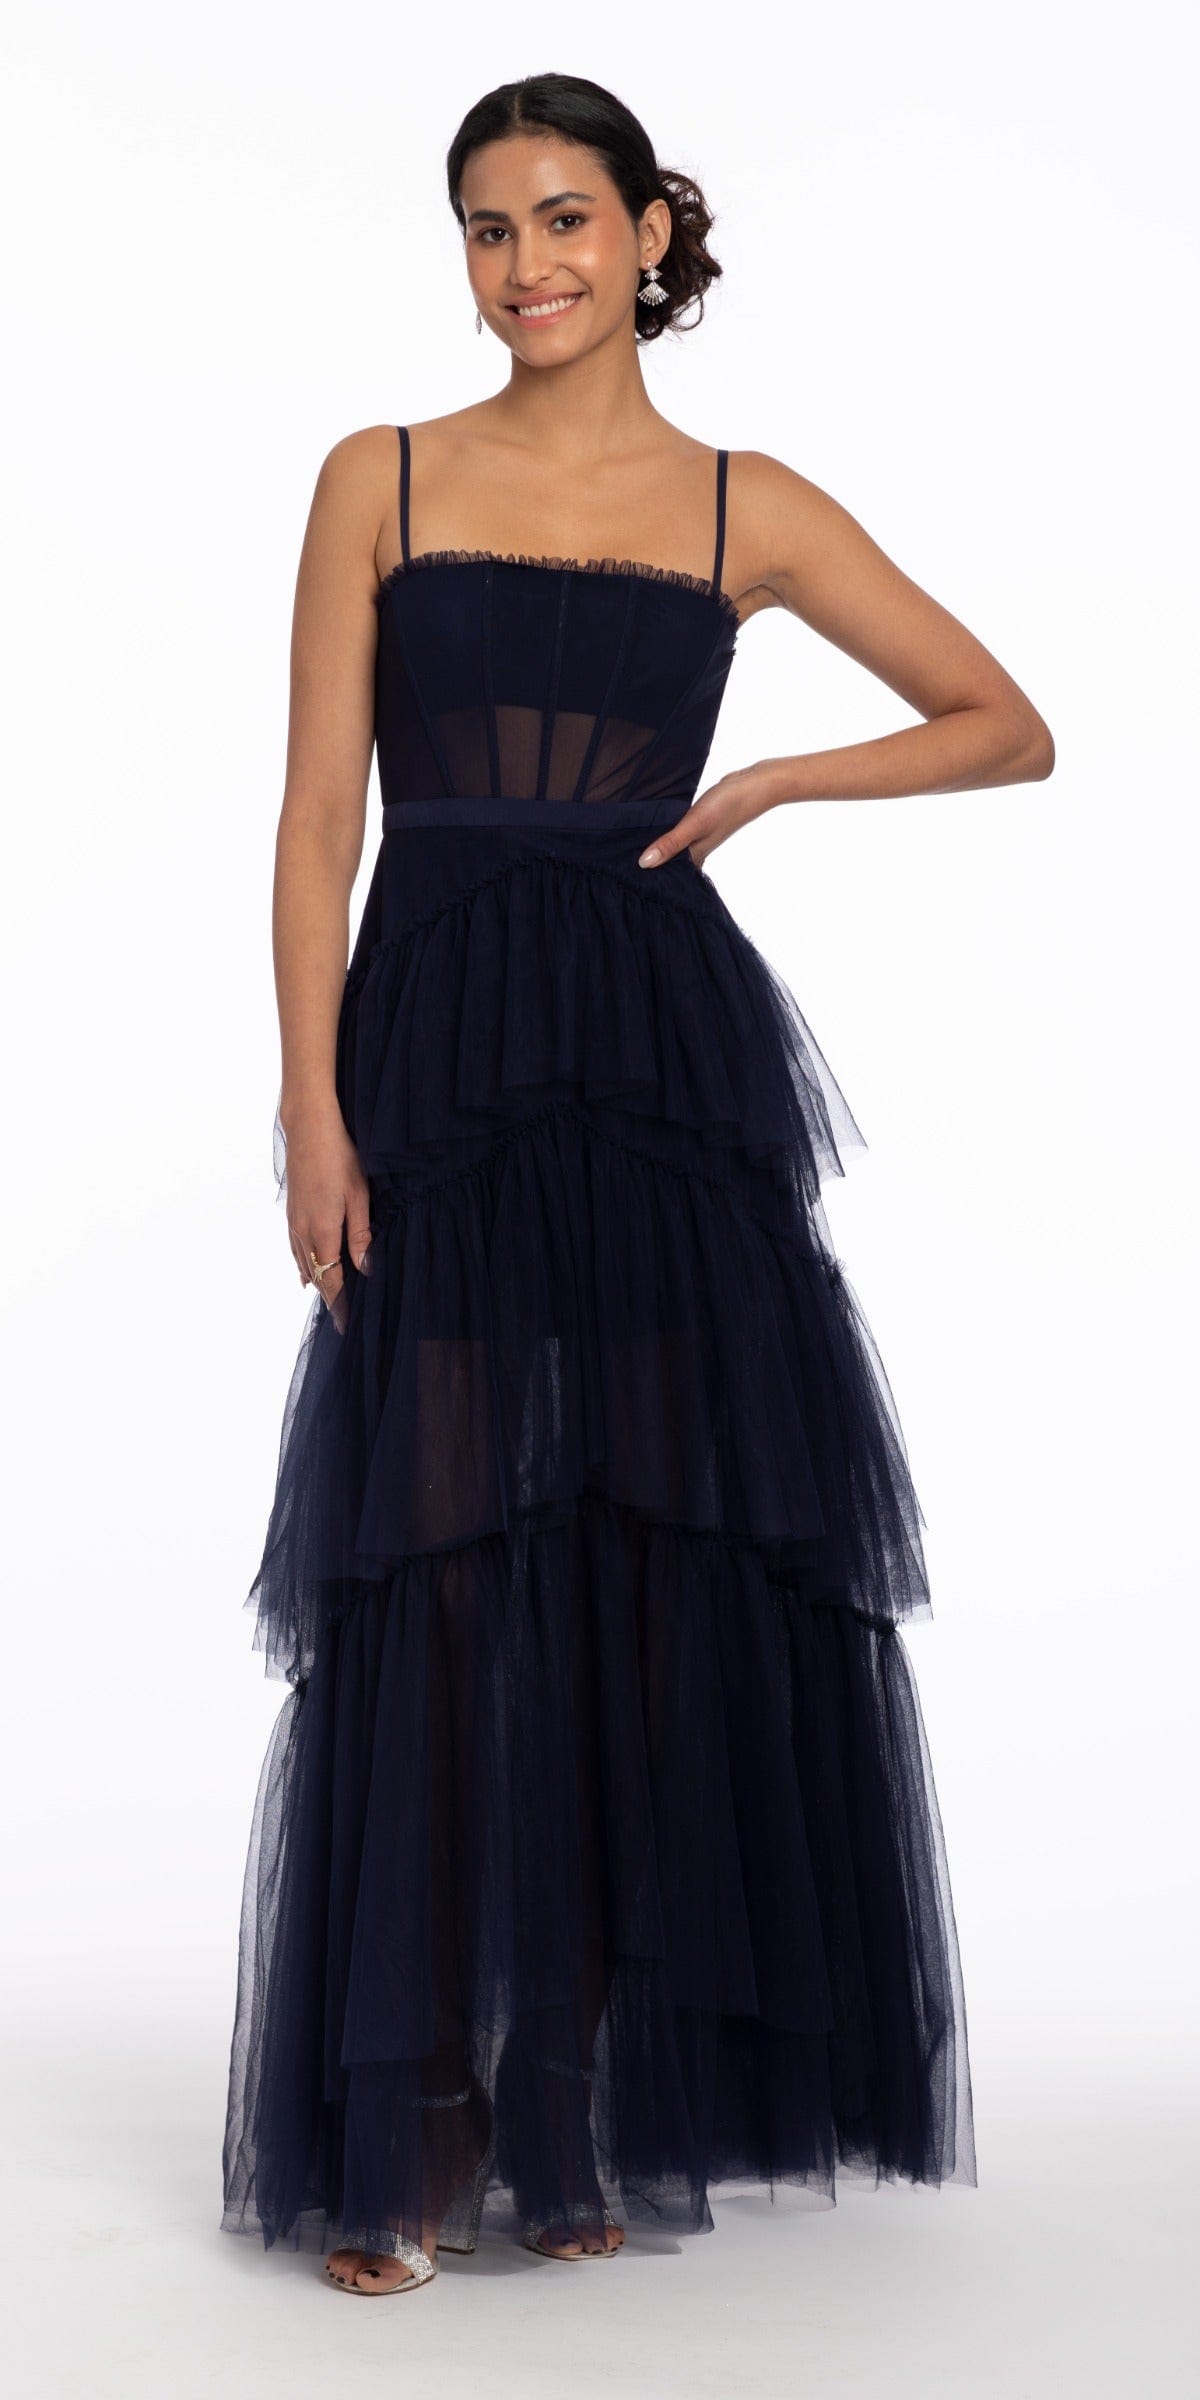 Camille La Vie Sheer Mesh Corset Tiered A Line Dress missy / 4 / navy